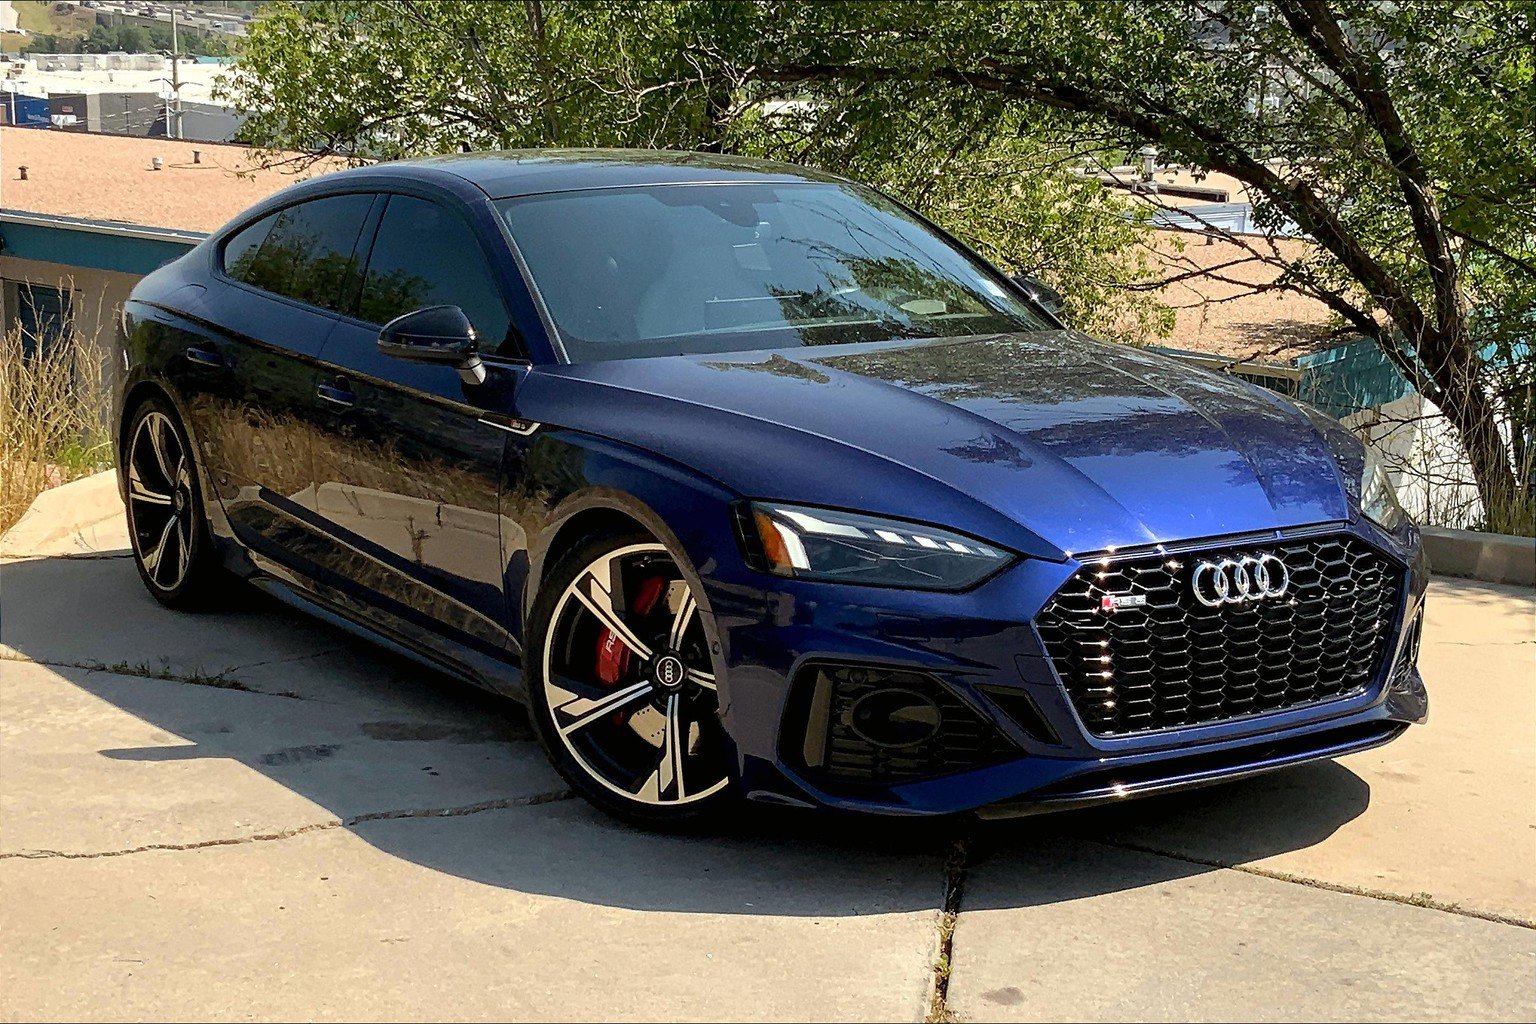 Used 2021 Audi RS 5 Sportback Base with VIN WUAAWCF59MA903998 for sale in Colorado Springs, CO